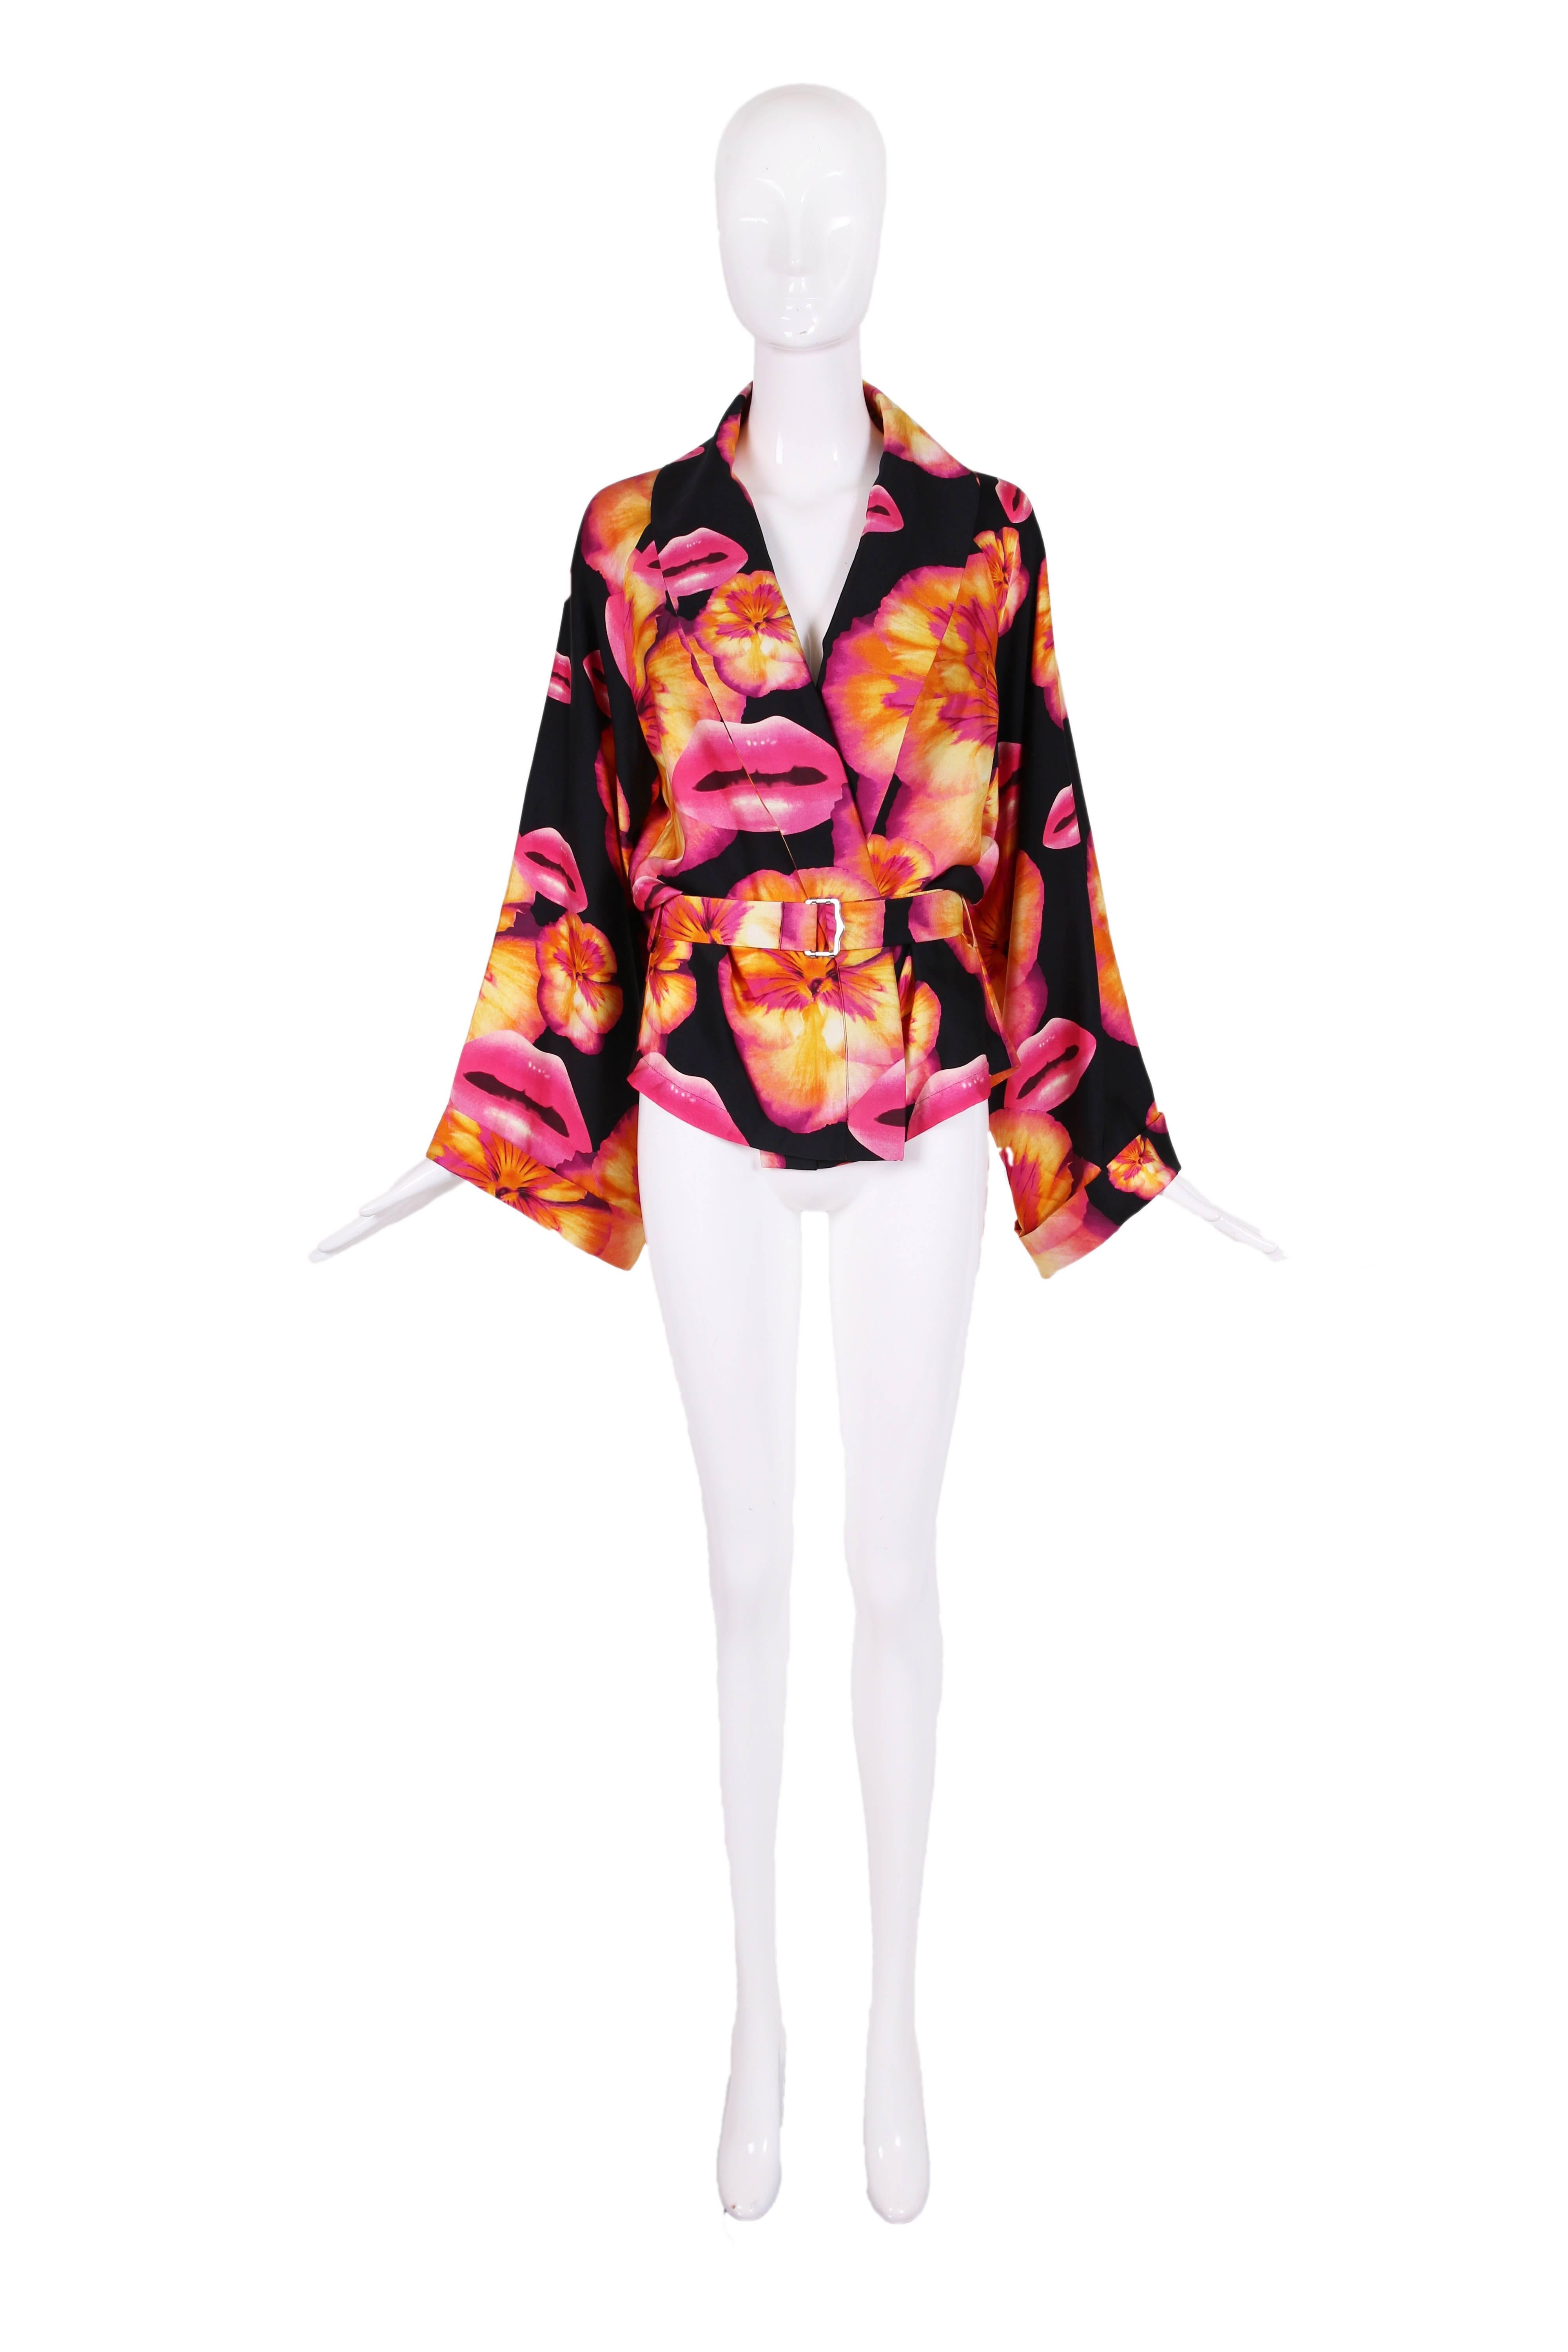 Christian Dior by John Galliano 100% silk pink, purple, yellow, orange and black techno lip and pansy print belted jacket or top in the style of a kimono. Features full sleeves, a lapel that transitions at the waist into parallel bands, belt loops